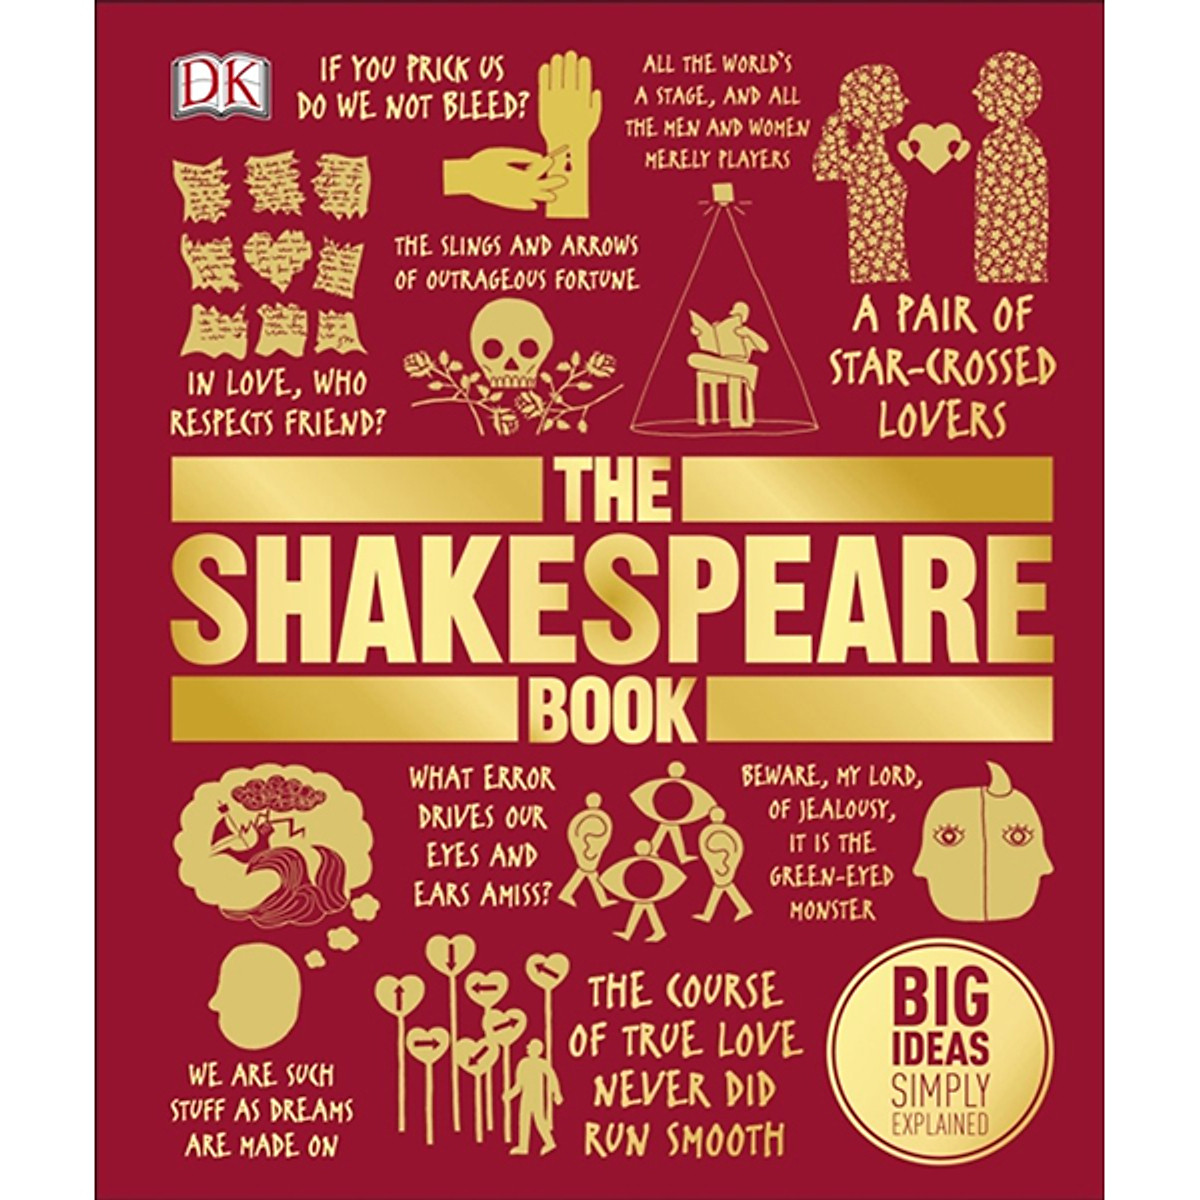 DK The Shakespeare Book (Series Big Ideas Simply Explained)